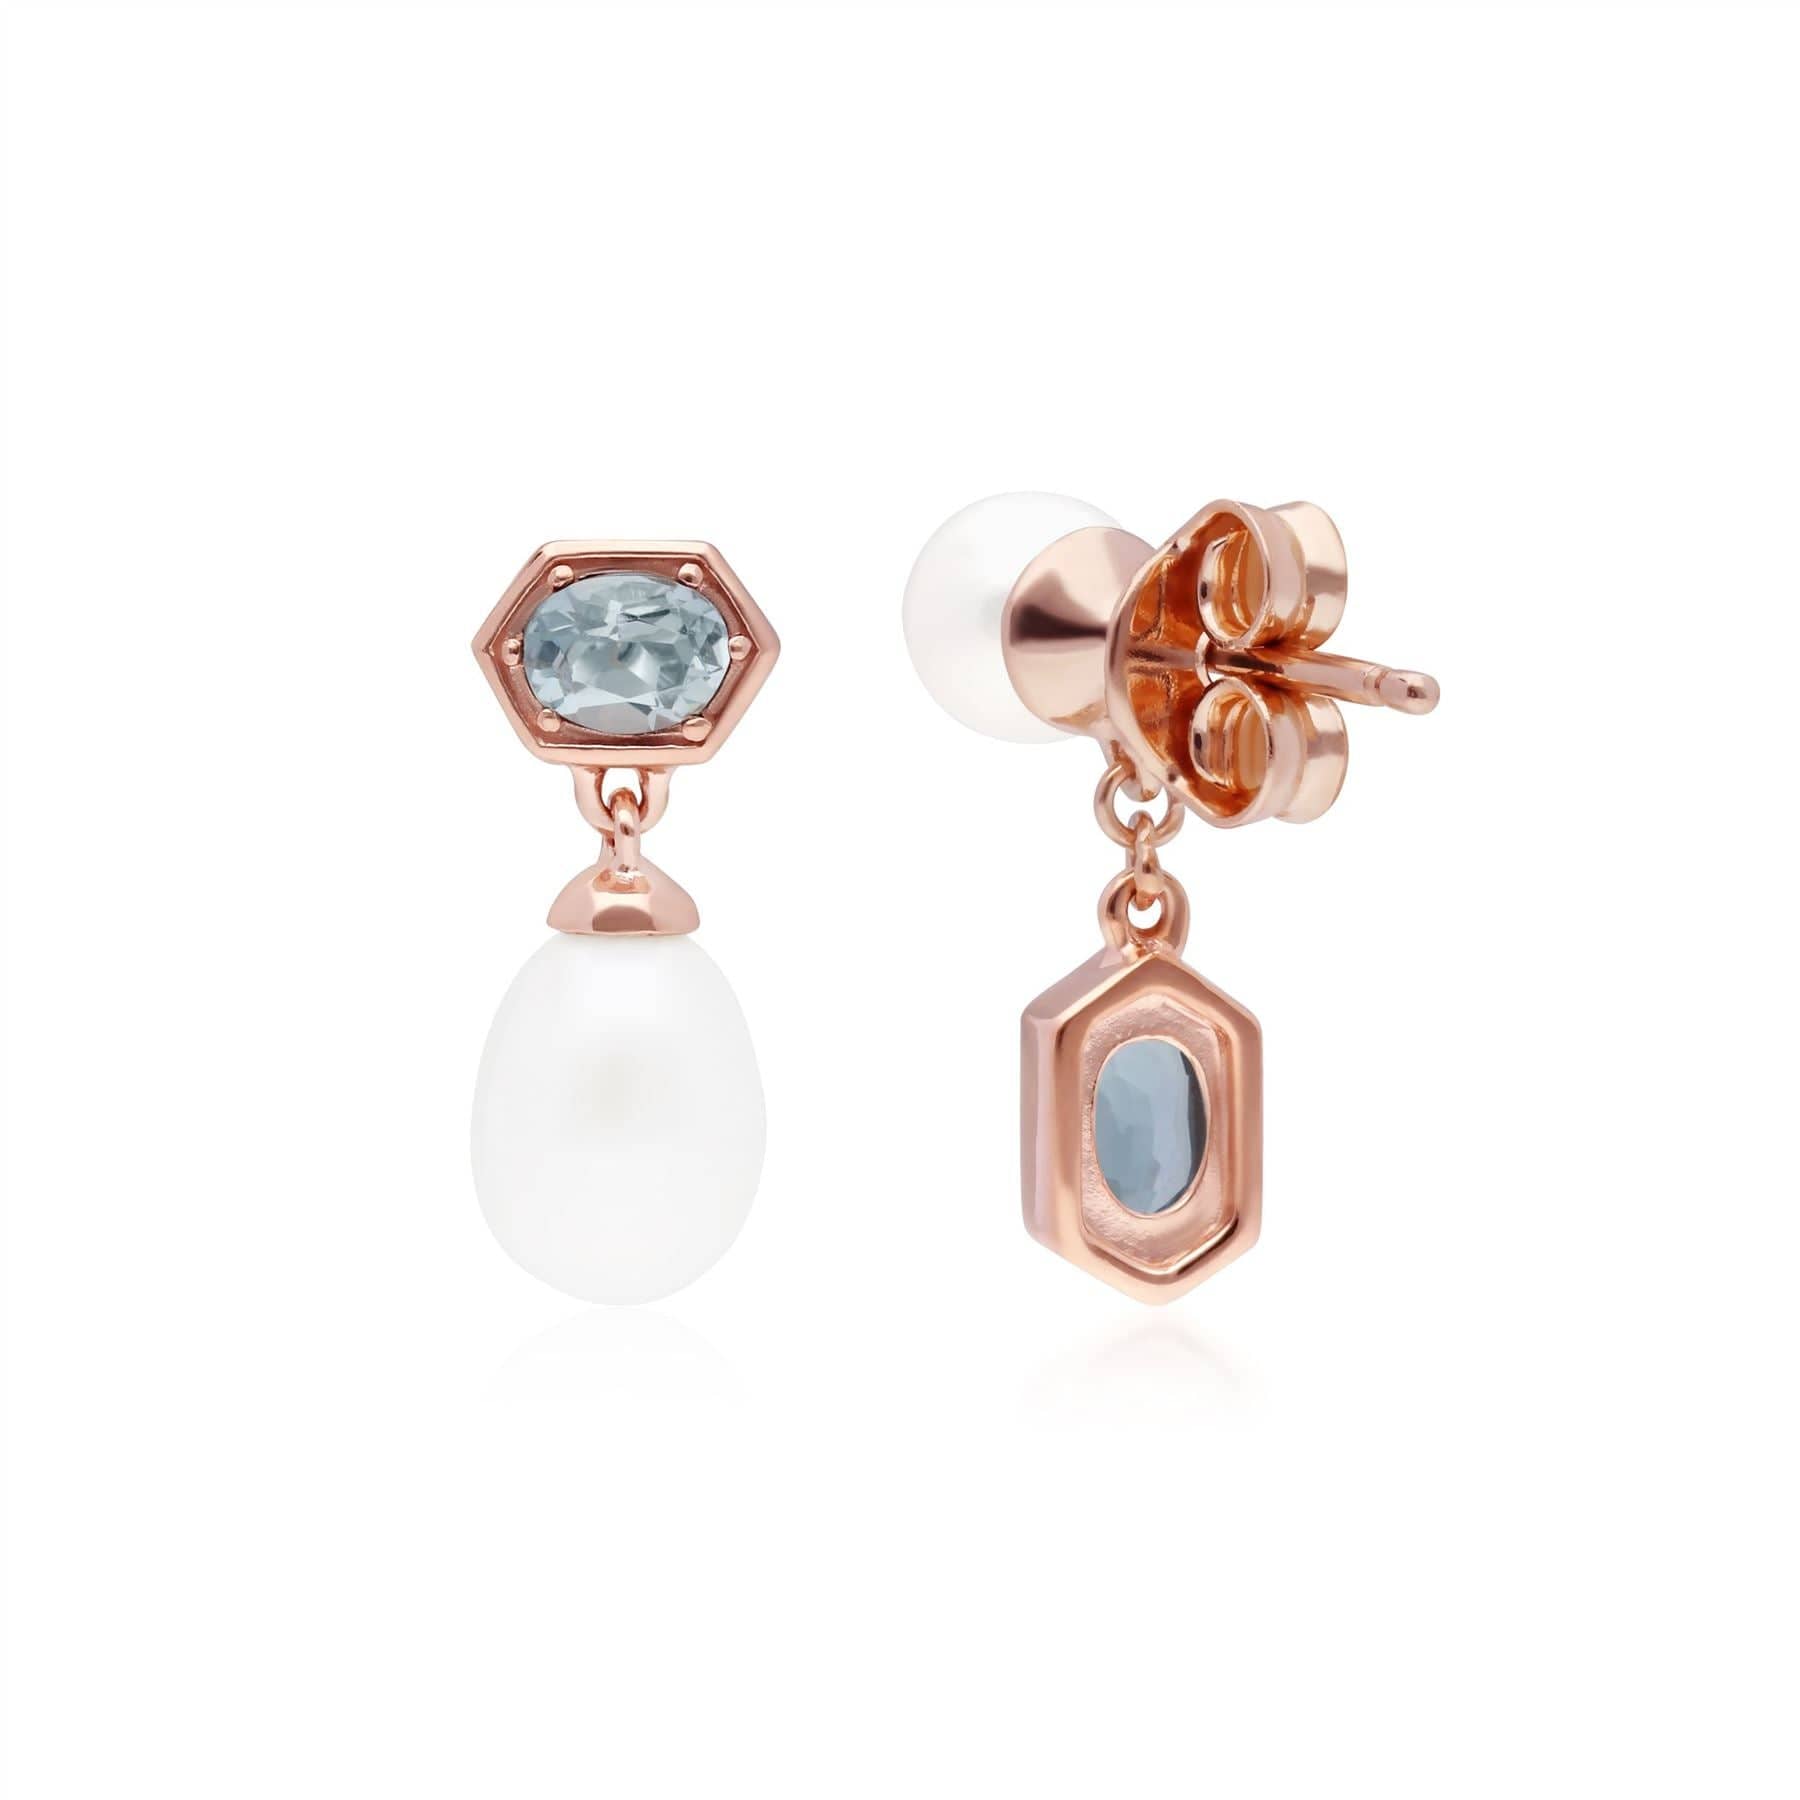 Modern Pearl & Aquamarine Mismatched Drop Earrings in Rose Gold Plated Silver - Gemondo